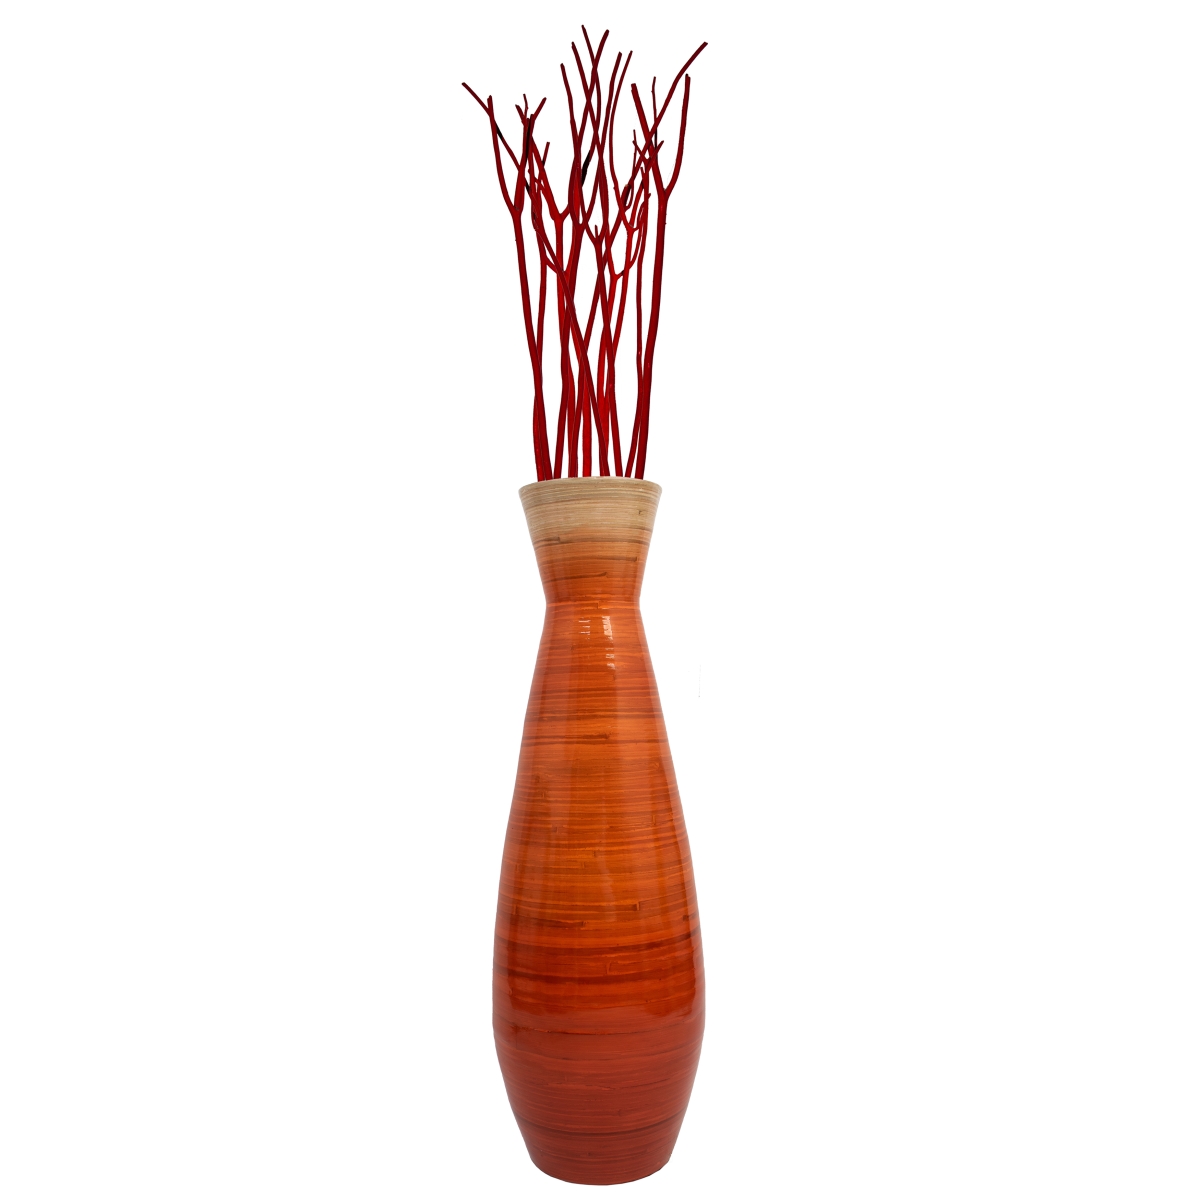 Picture of Uniquewise QI003242.L.OR Uniquewise 31.5' Classic Bamboo Floor Vase Handmade, For Dining, Living Room, Entryway, Fill Up With Dried Branches Or Flowers, Glossy Orange,